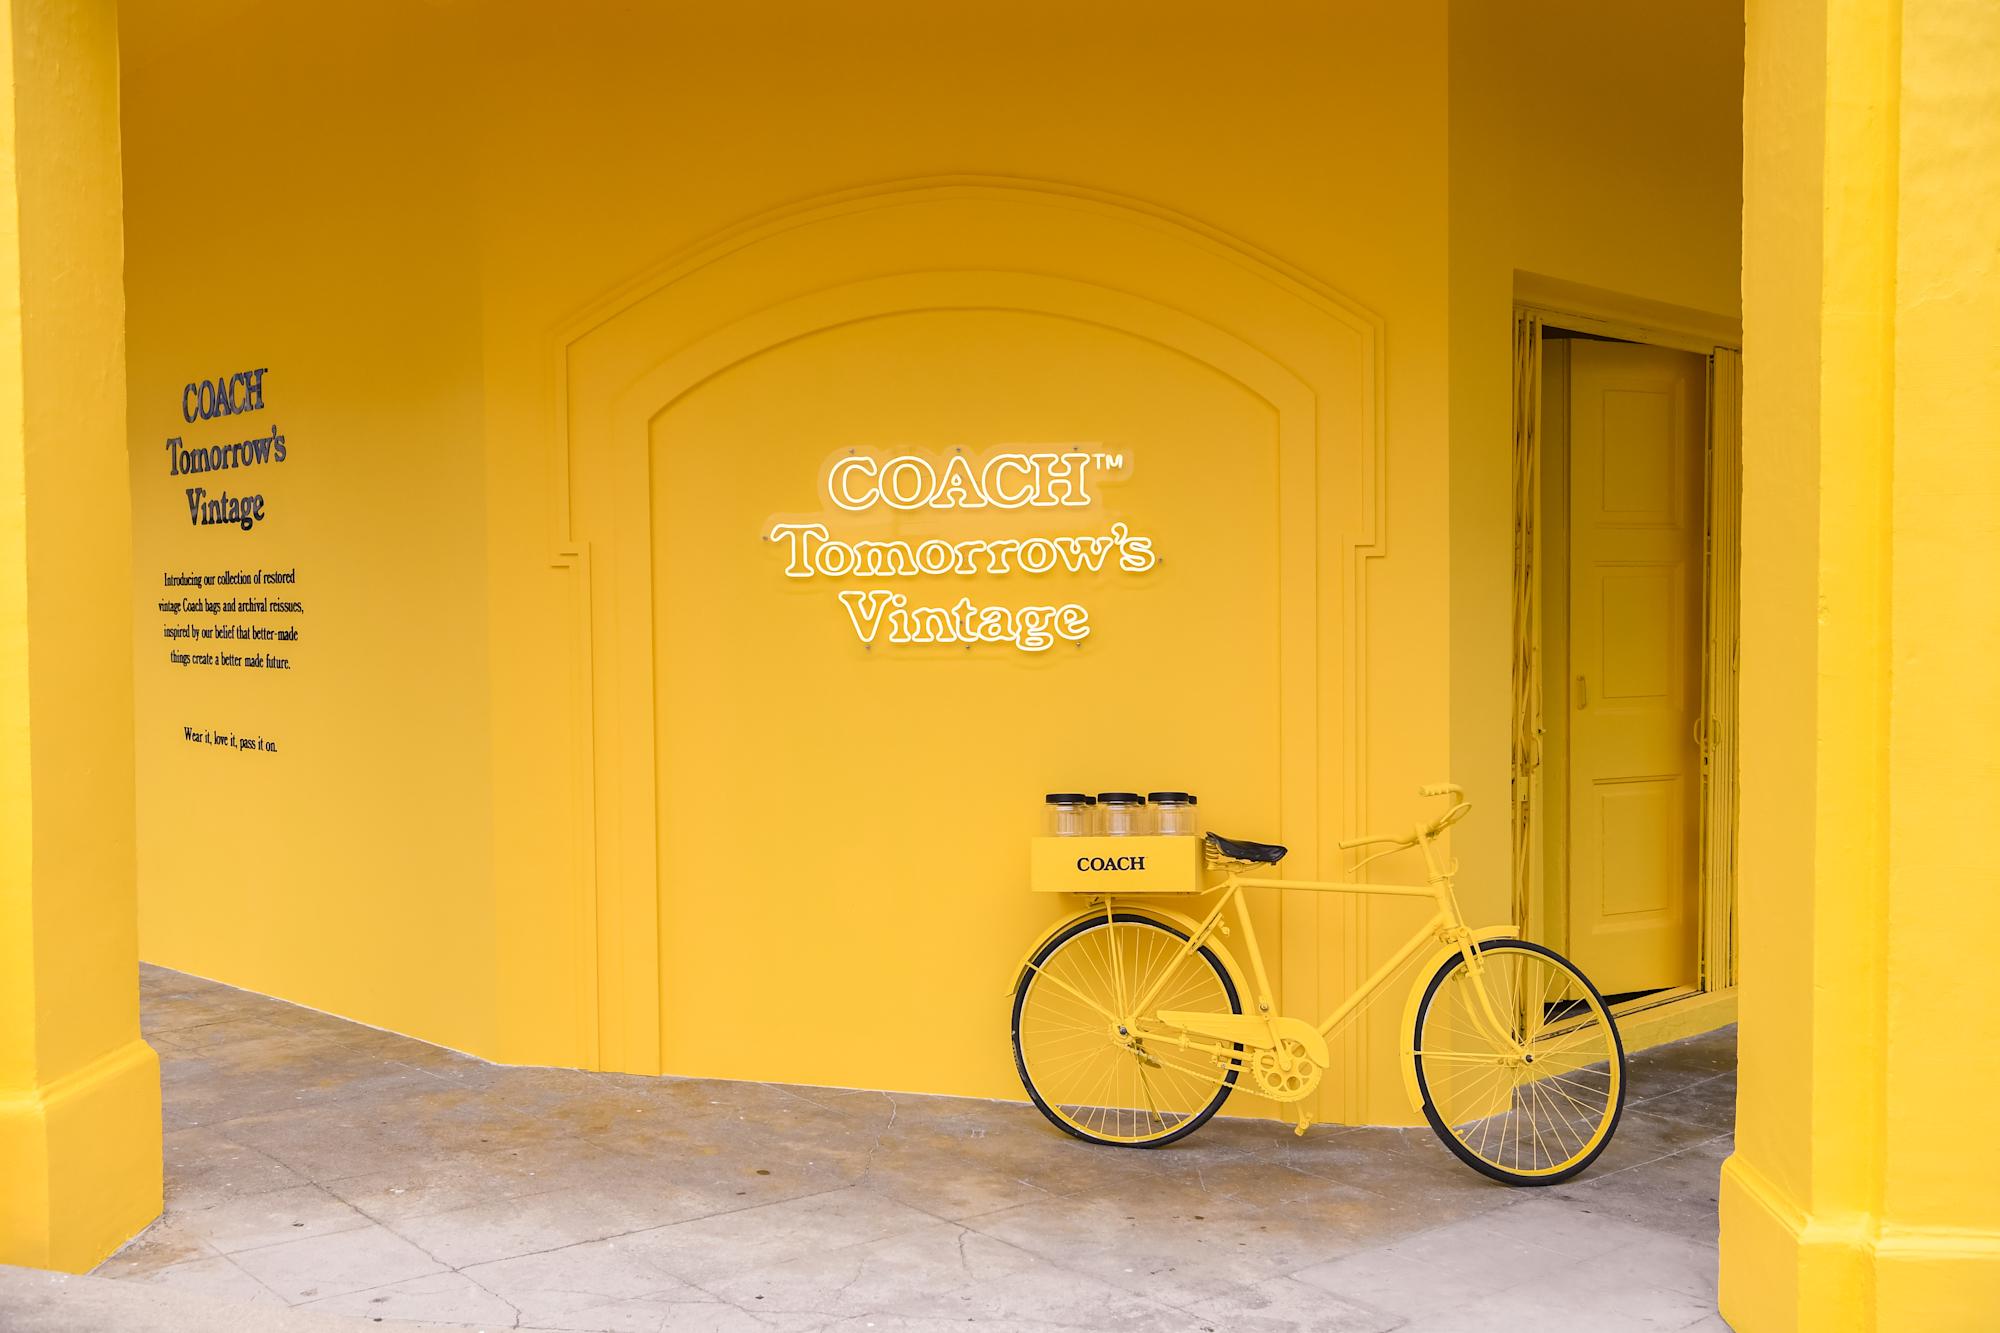 Coach launches Tomorrow’s Vintage, its first concept store in Singapore